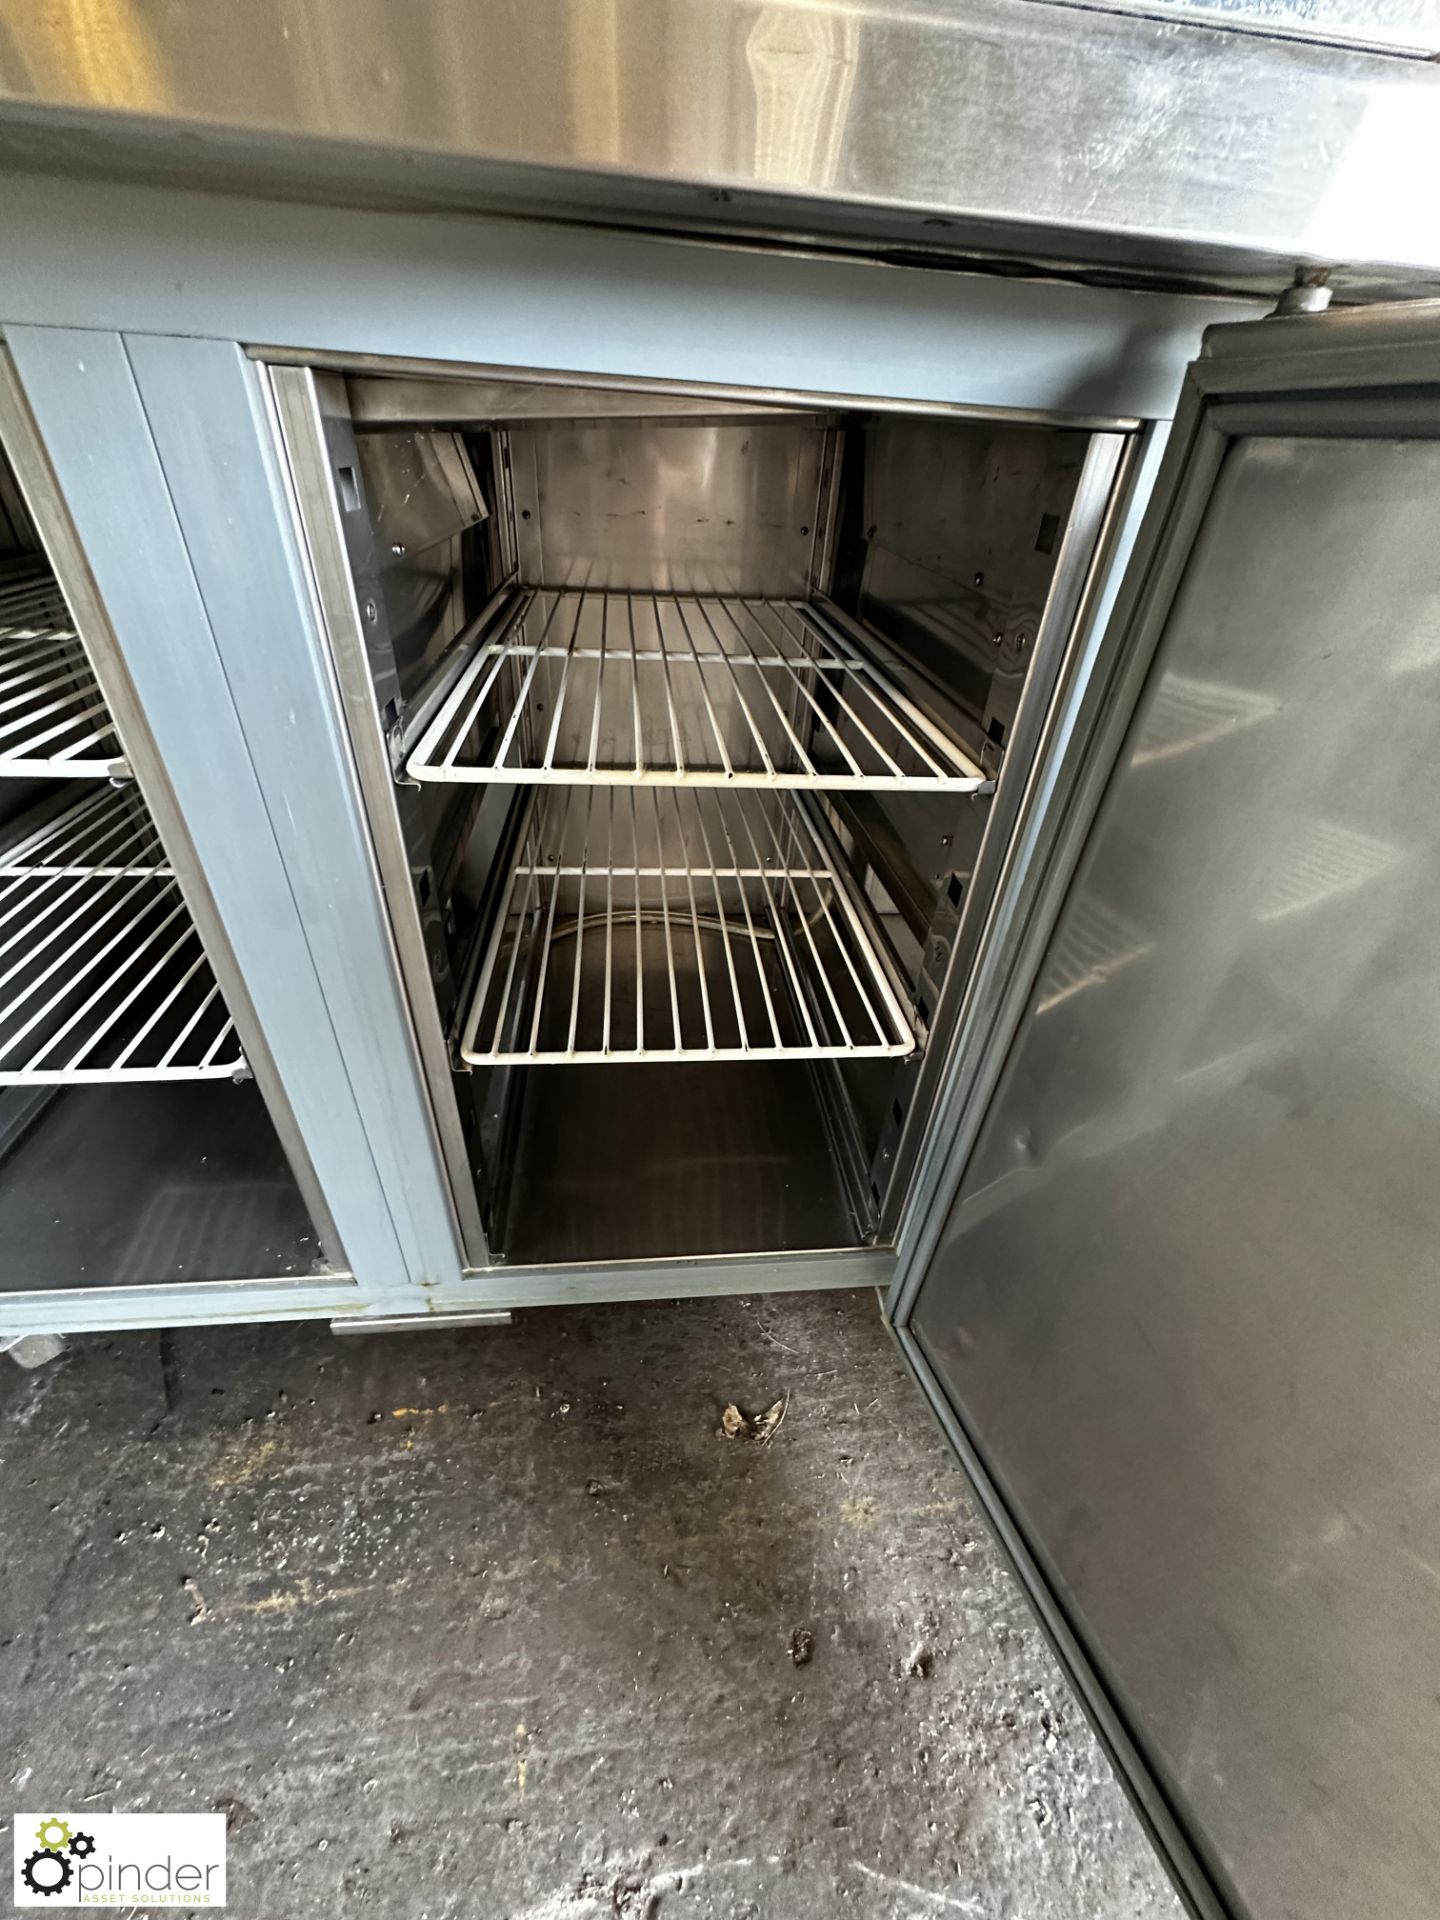 Stainless steel mobile 3-door Refrigerated Counter, 1880mm x 700mm x 860mm - Image 4 of 8